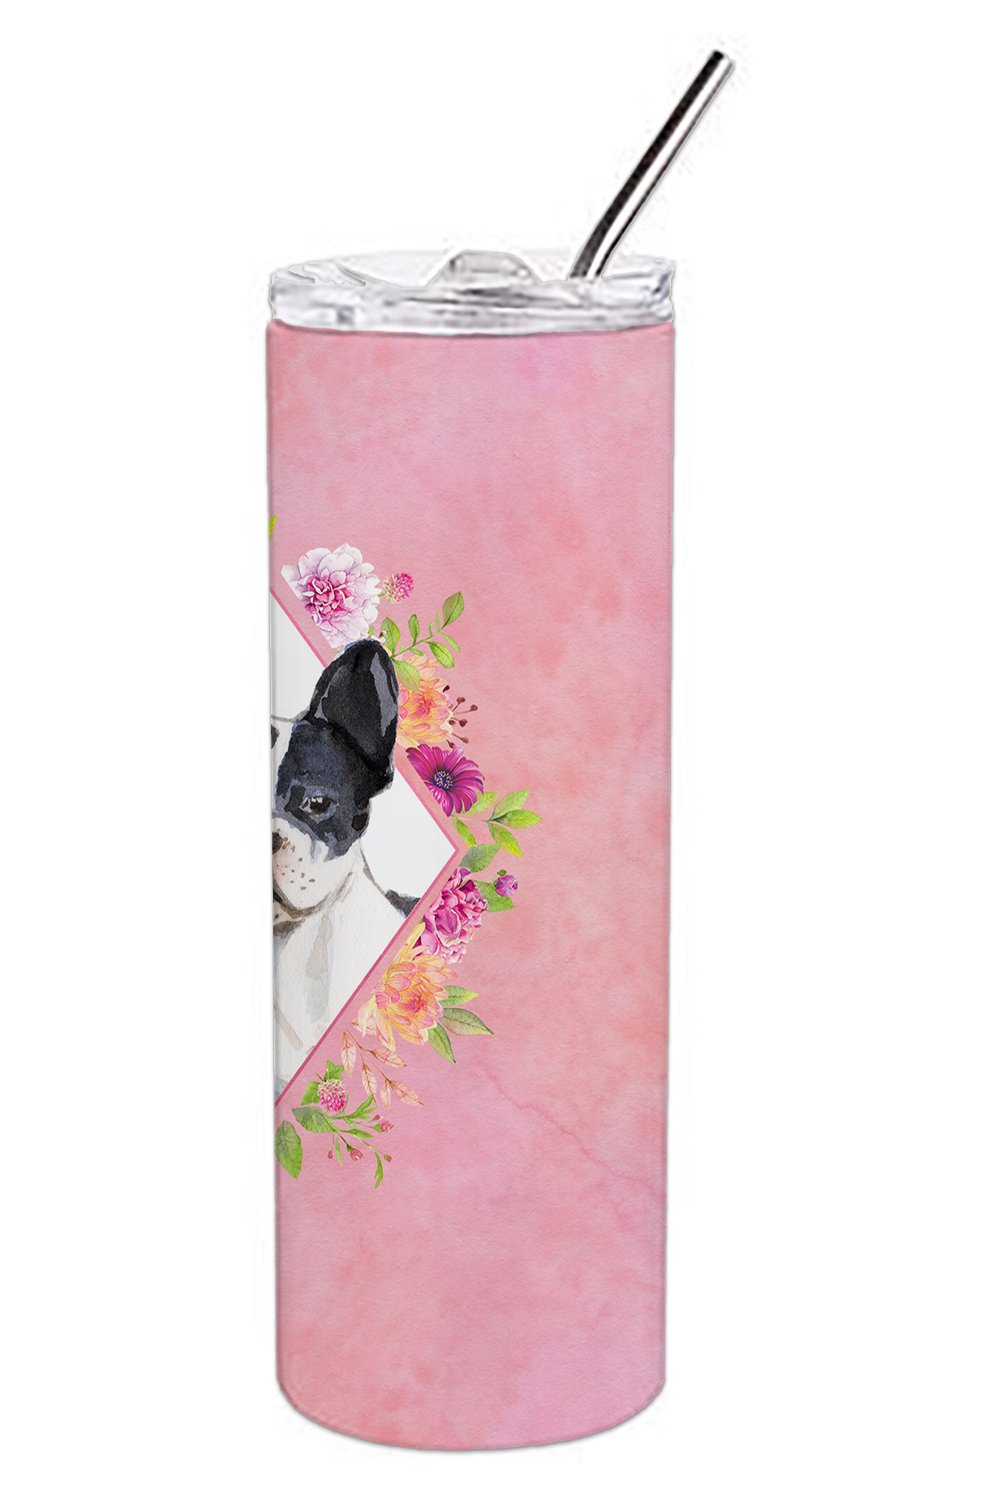 Black and White Frenchie Pink Flowers Double Walled Stainless Steel 20 oz Skinny Tumbler CK4260TBL20 by Caroline's Treasures